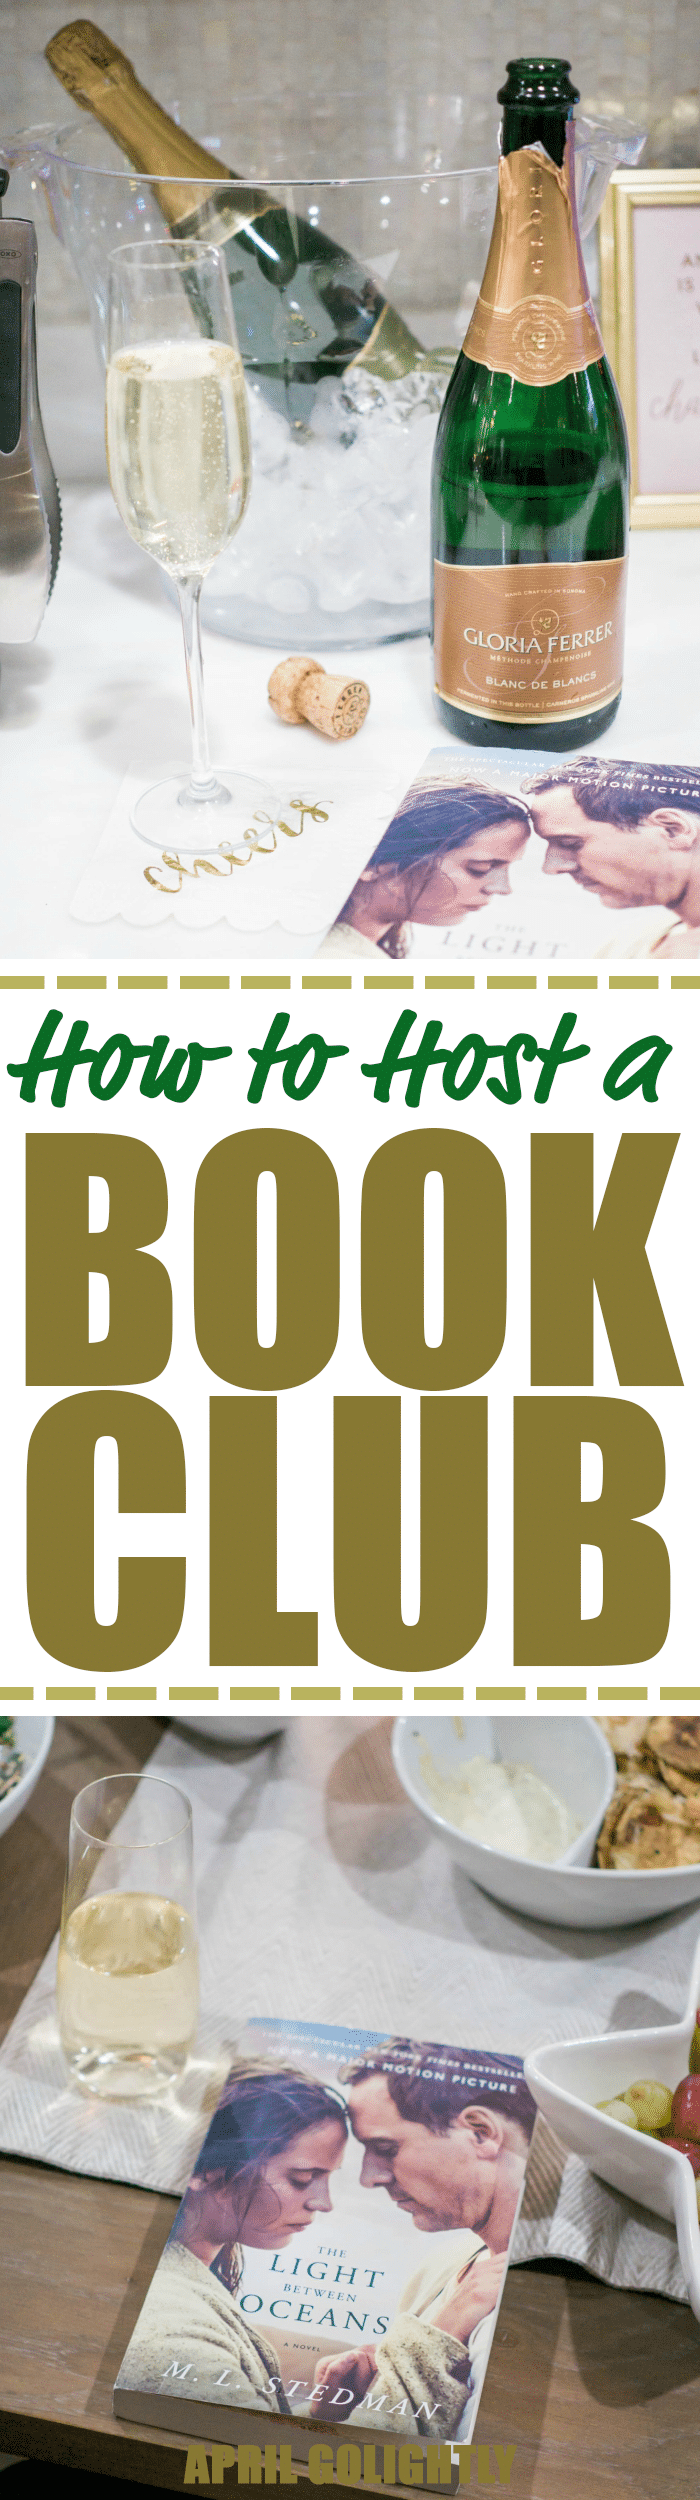 How to Host a Book Club with Wine with a full party plan with quiz and prizes, food ideas and wine pairings and printed sheets about the wine 